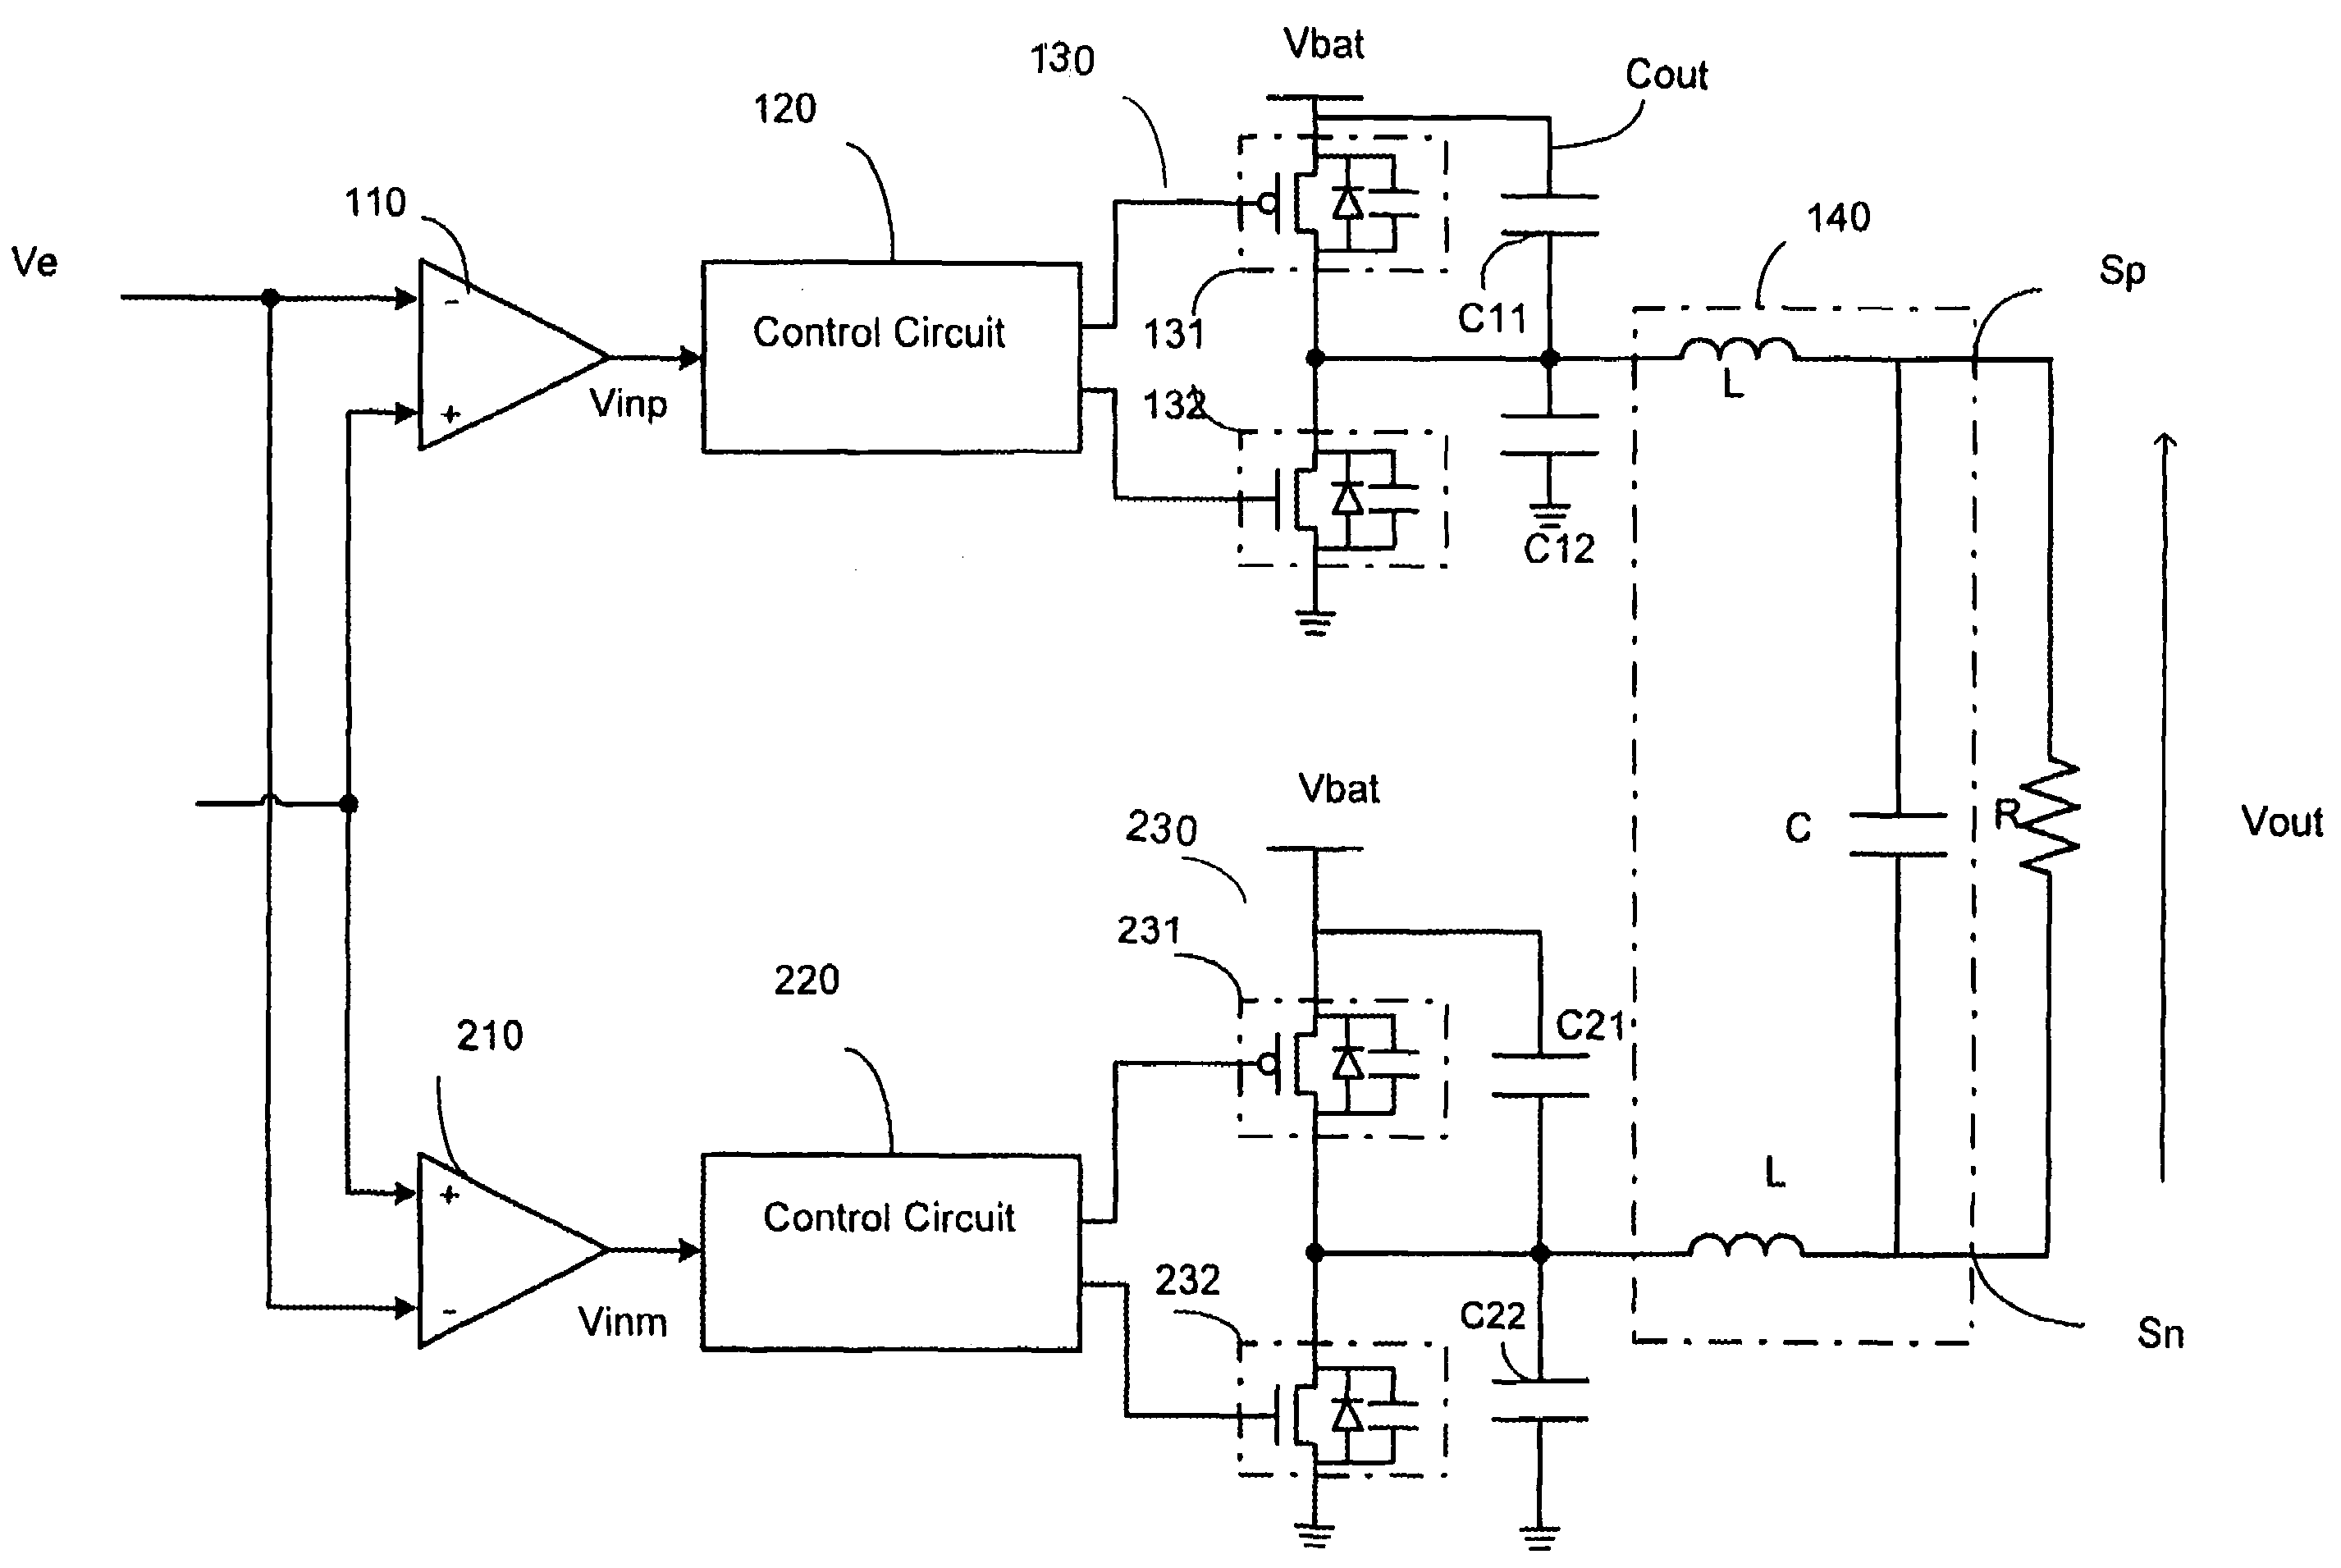 Power amplifier with low power distortion at output